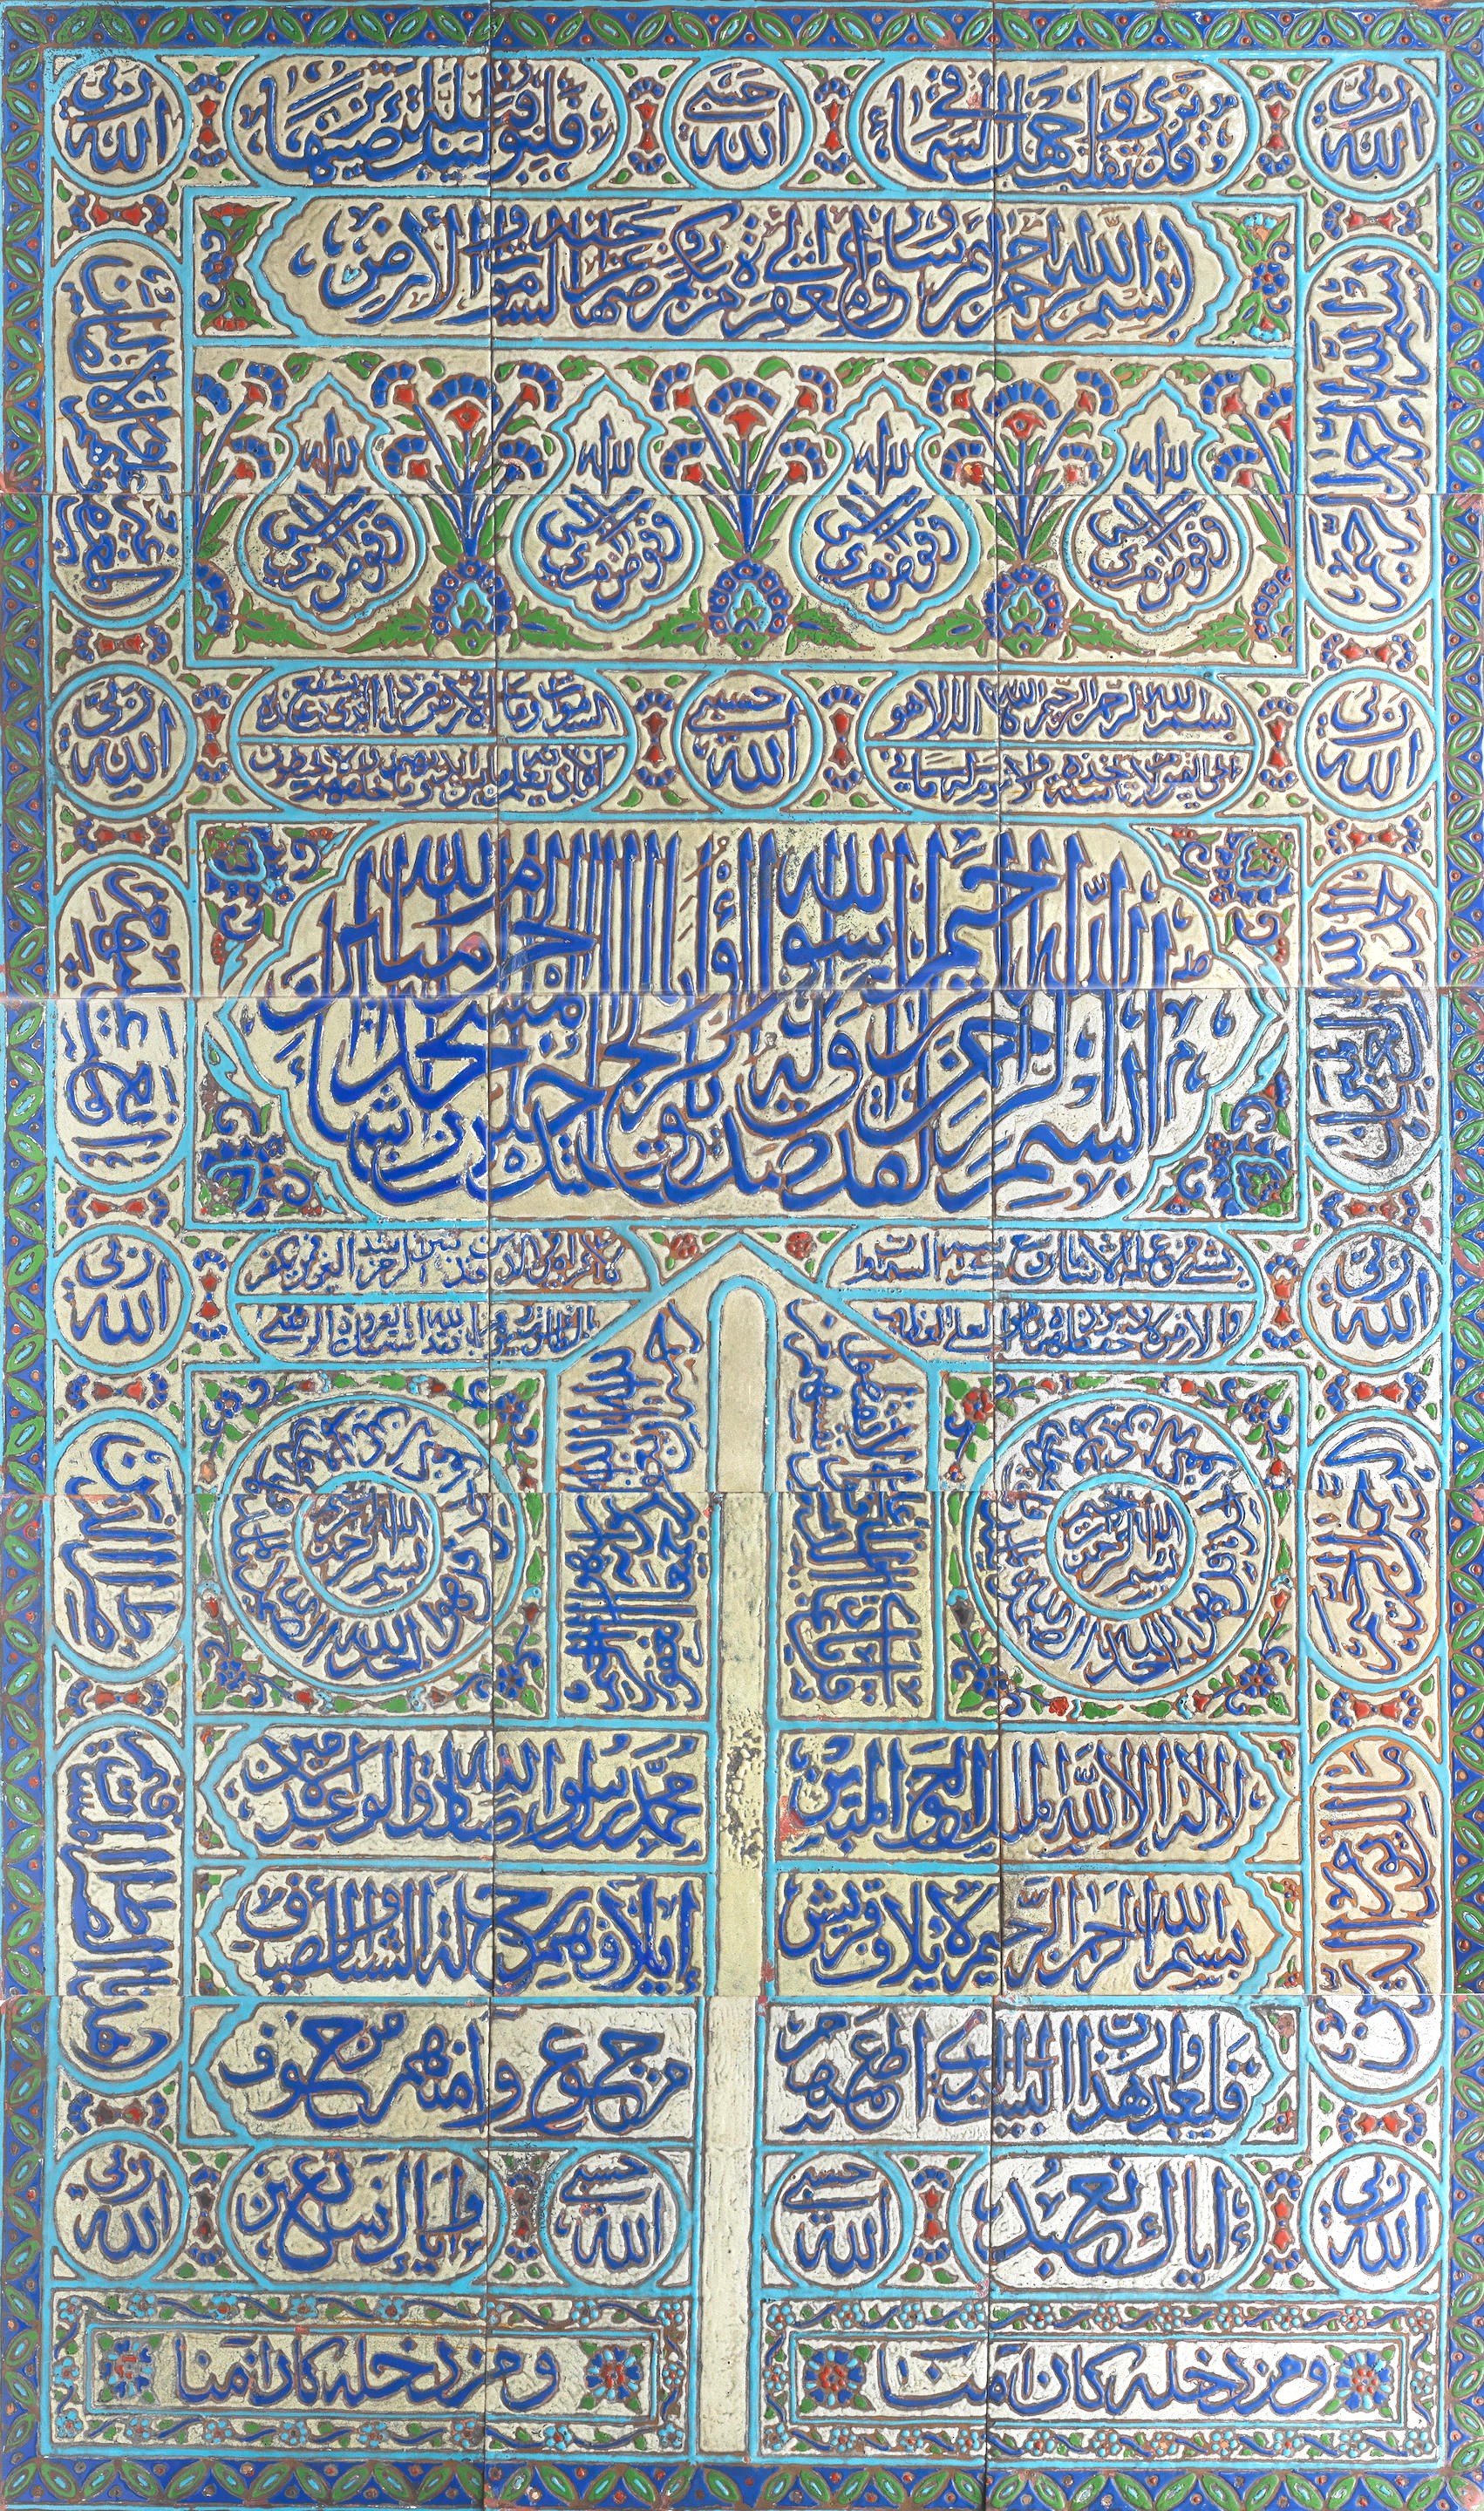 A MASSIVE 19TH CENTURY DAMASCUS ENAMELLED COPPER PANEL WITH INSCRIPTIONS FROM THE QUR'AN